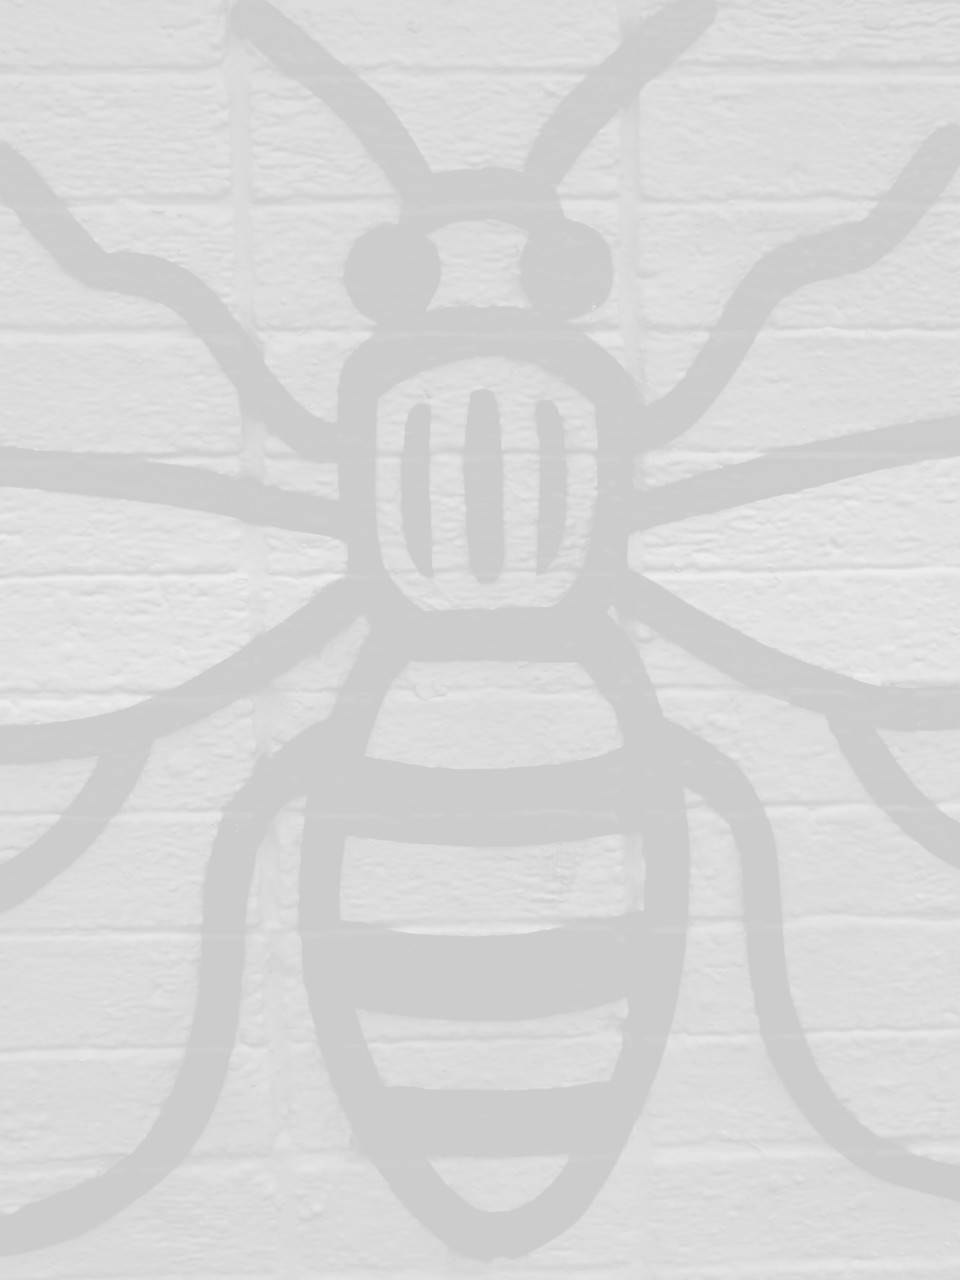 seo company in manchester image of manchester bee